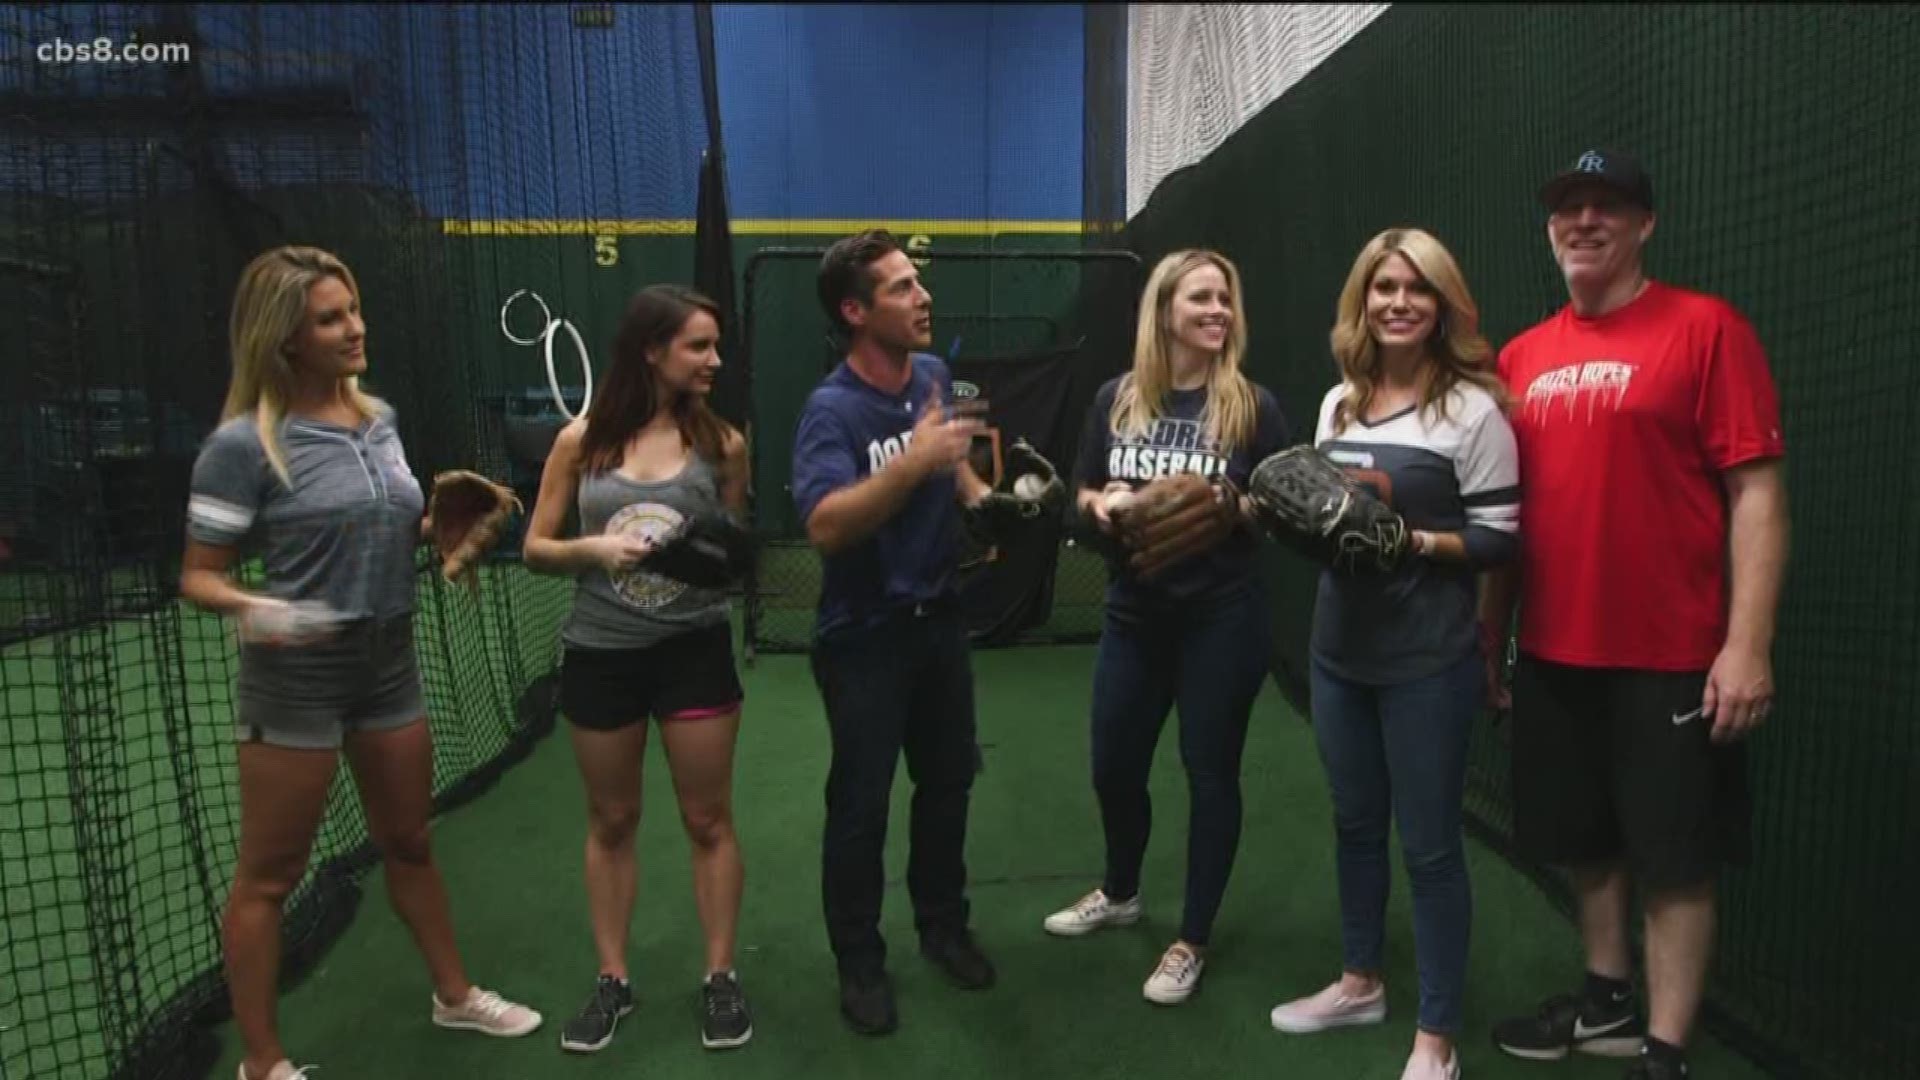 Vote for who you want to throw out the first pitch here! https://kfmb.us/firstpitch